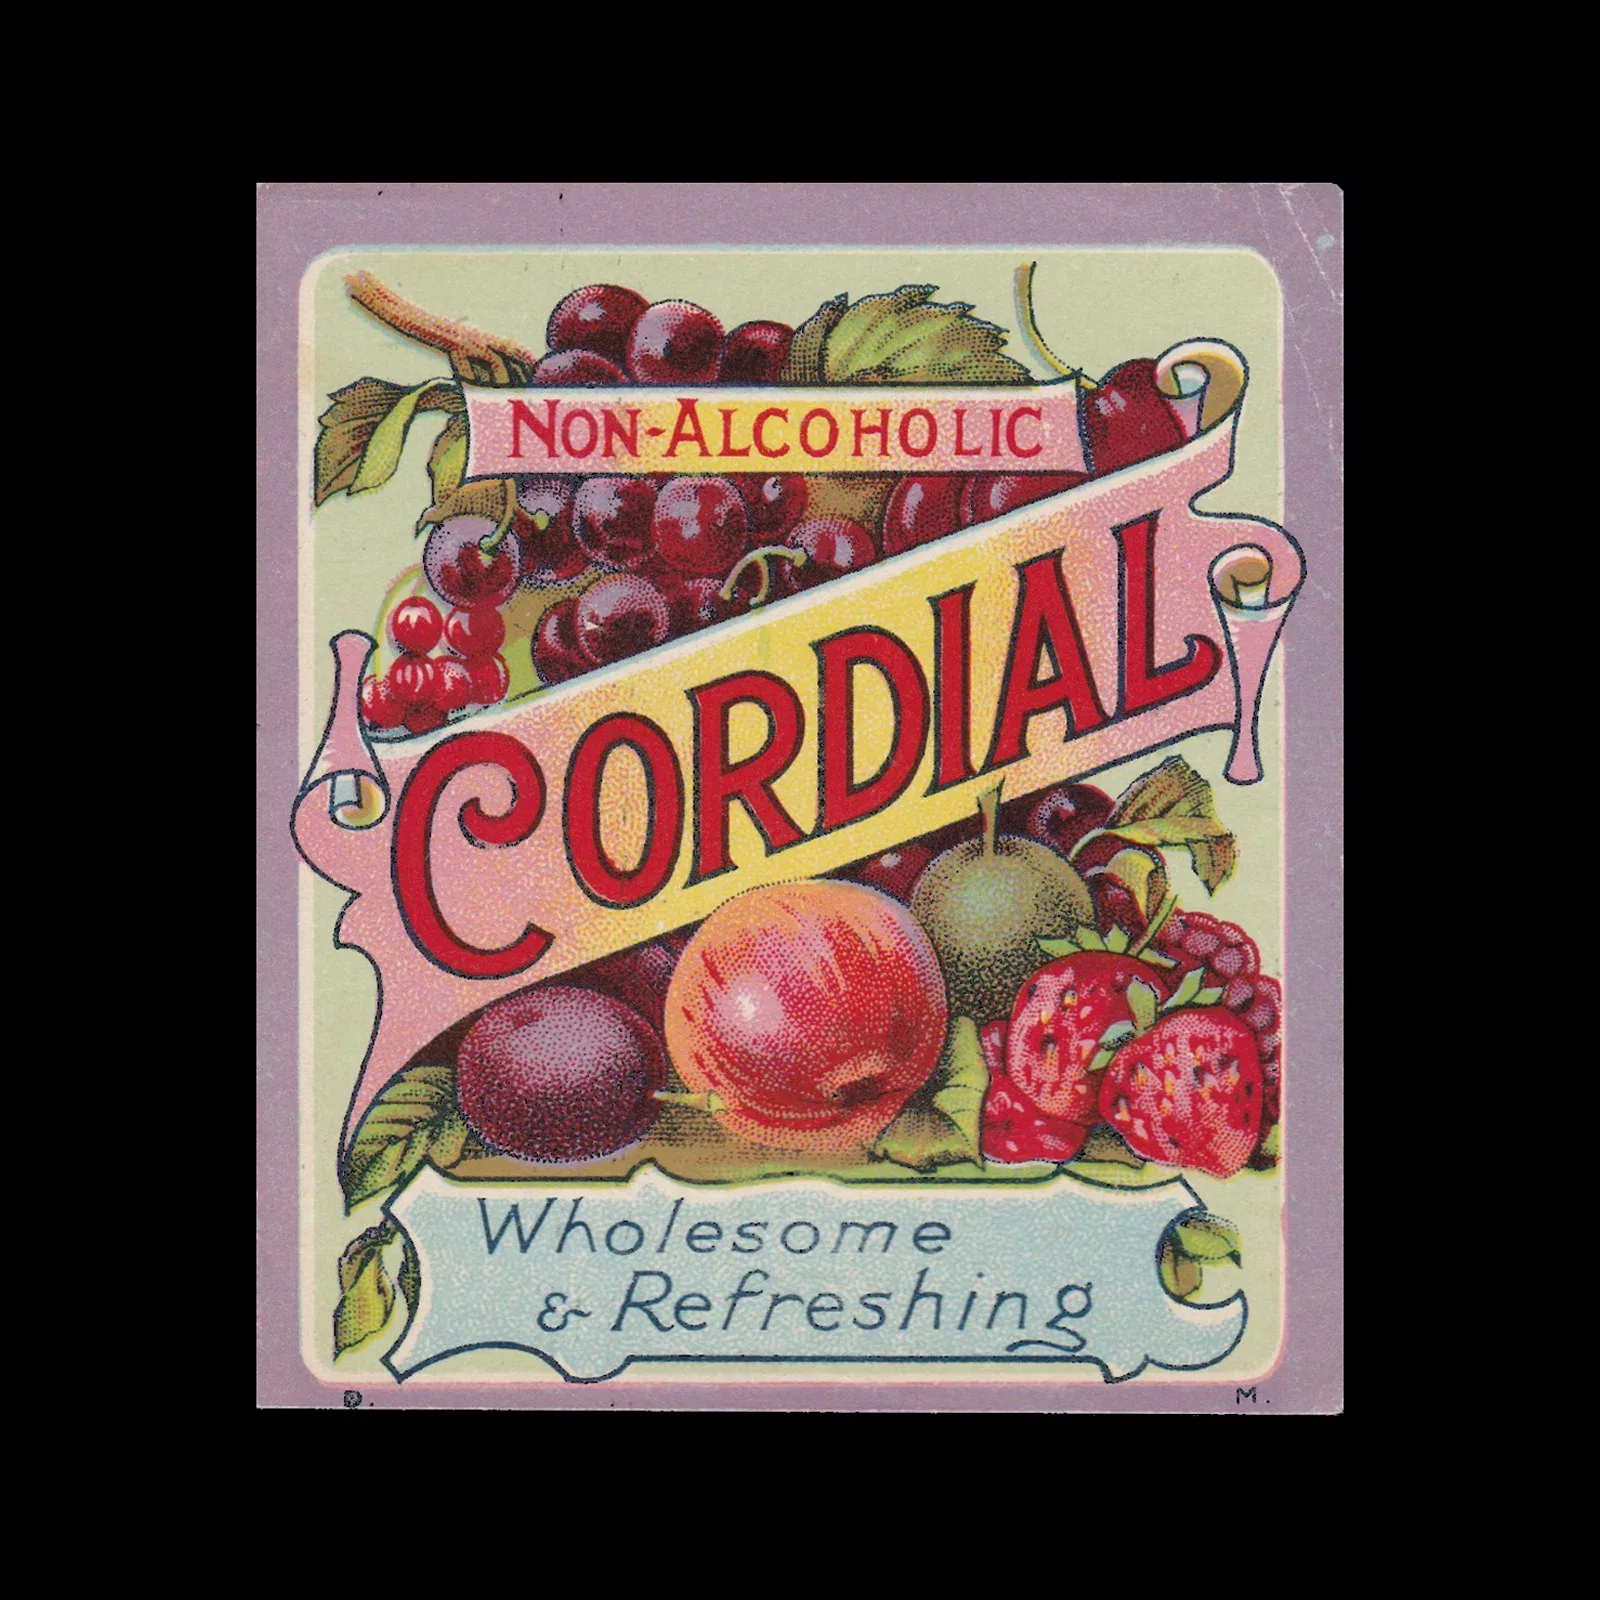 Non-Alcoholic Cordial, Fruit Drink Label